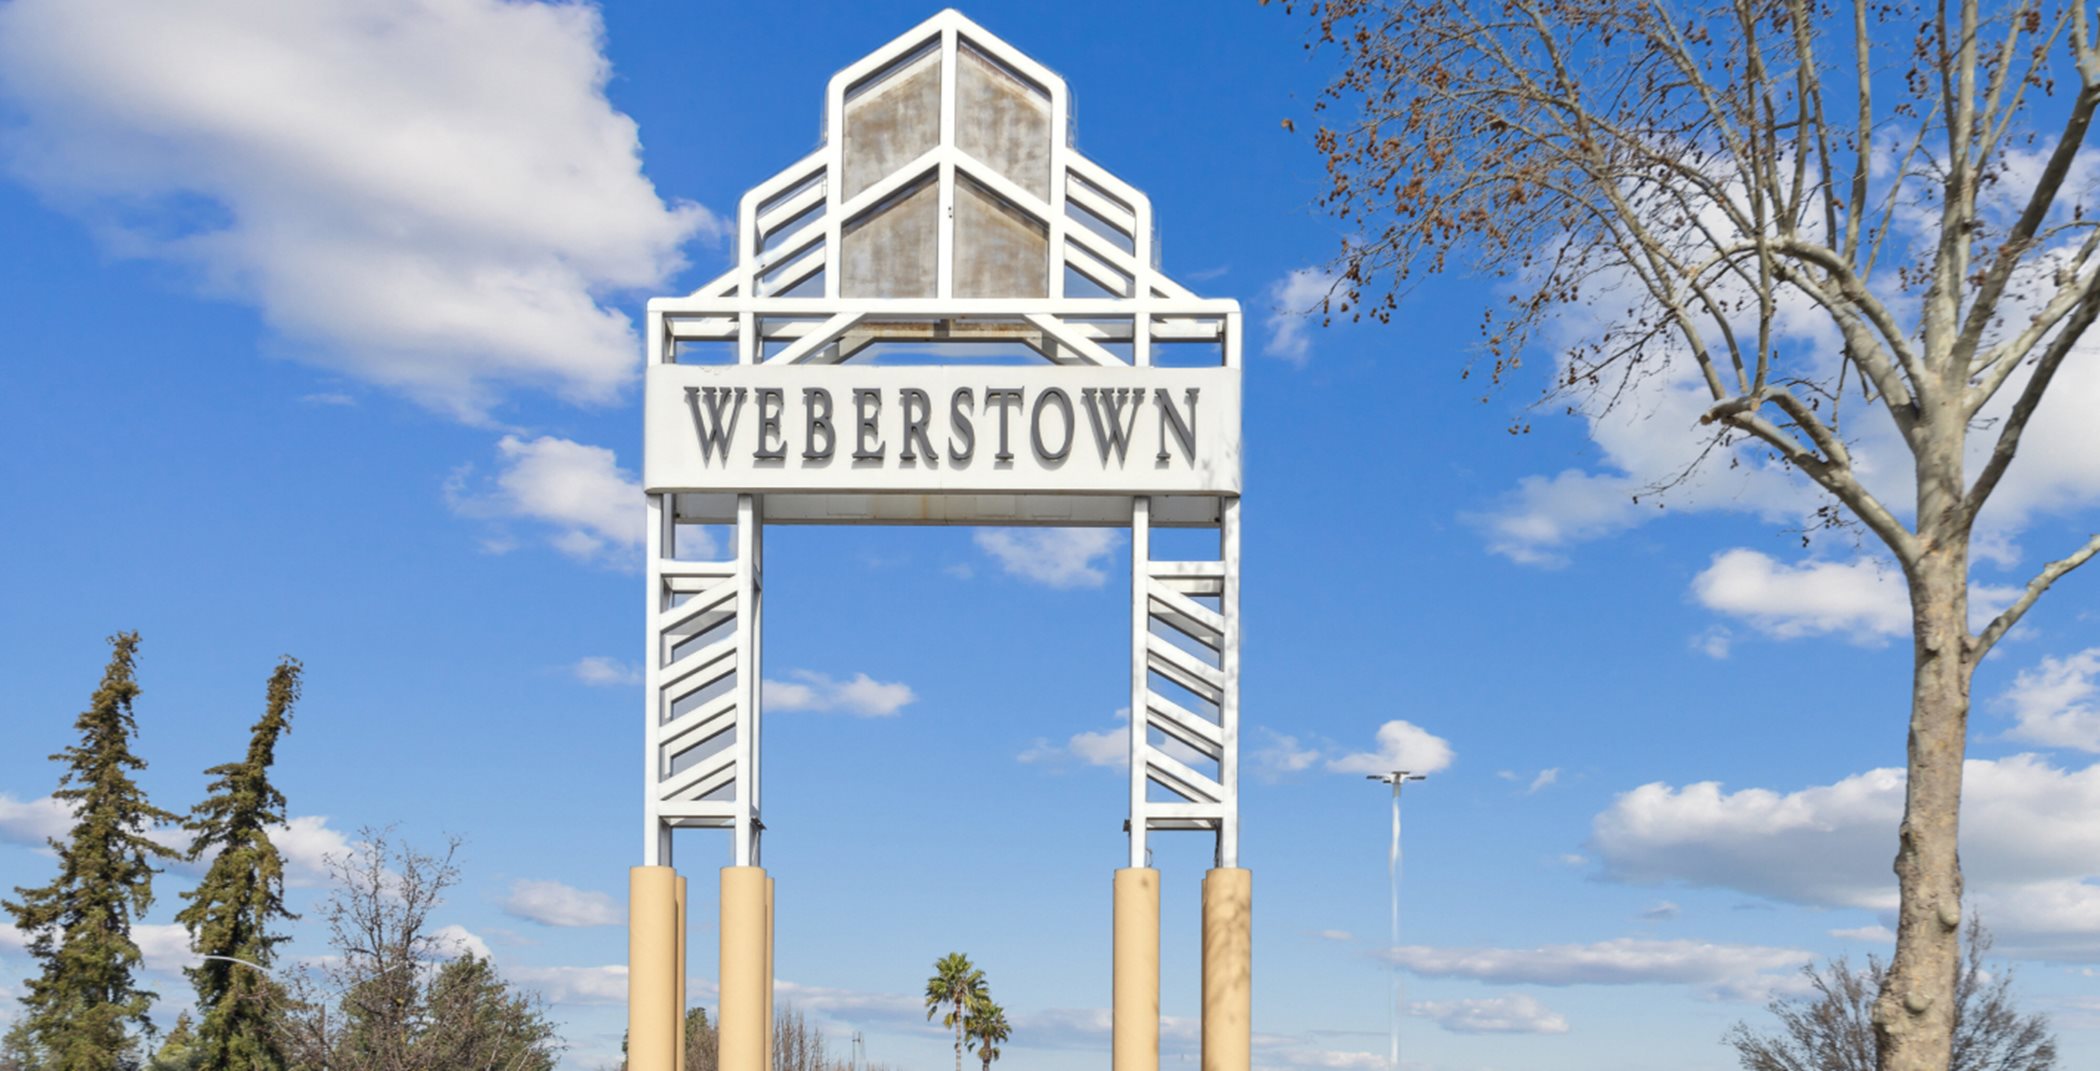 Weberstown Mall welcome sign